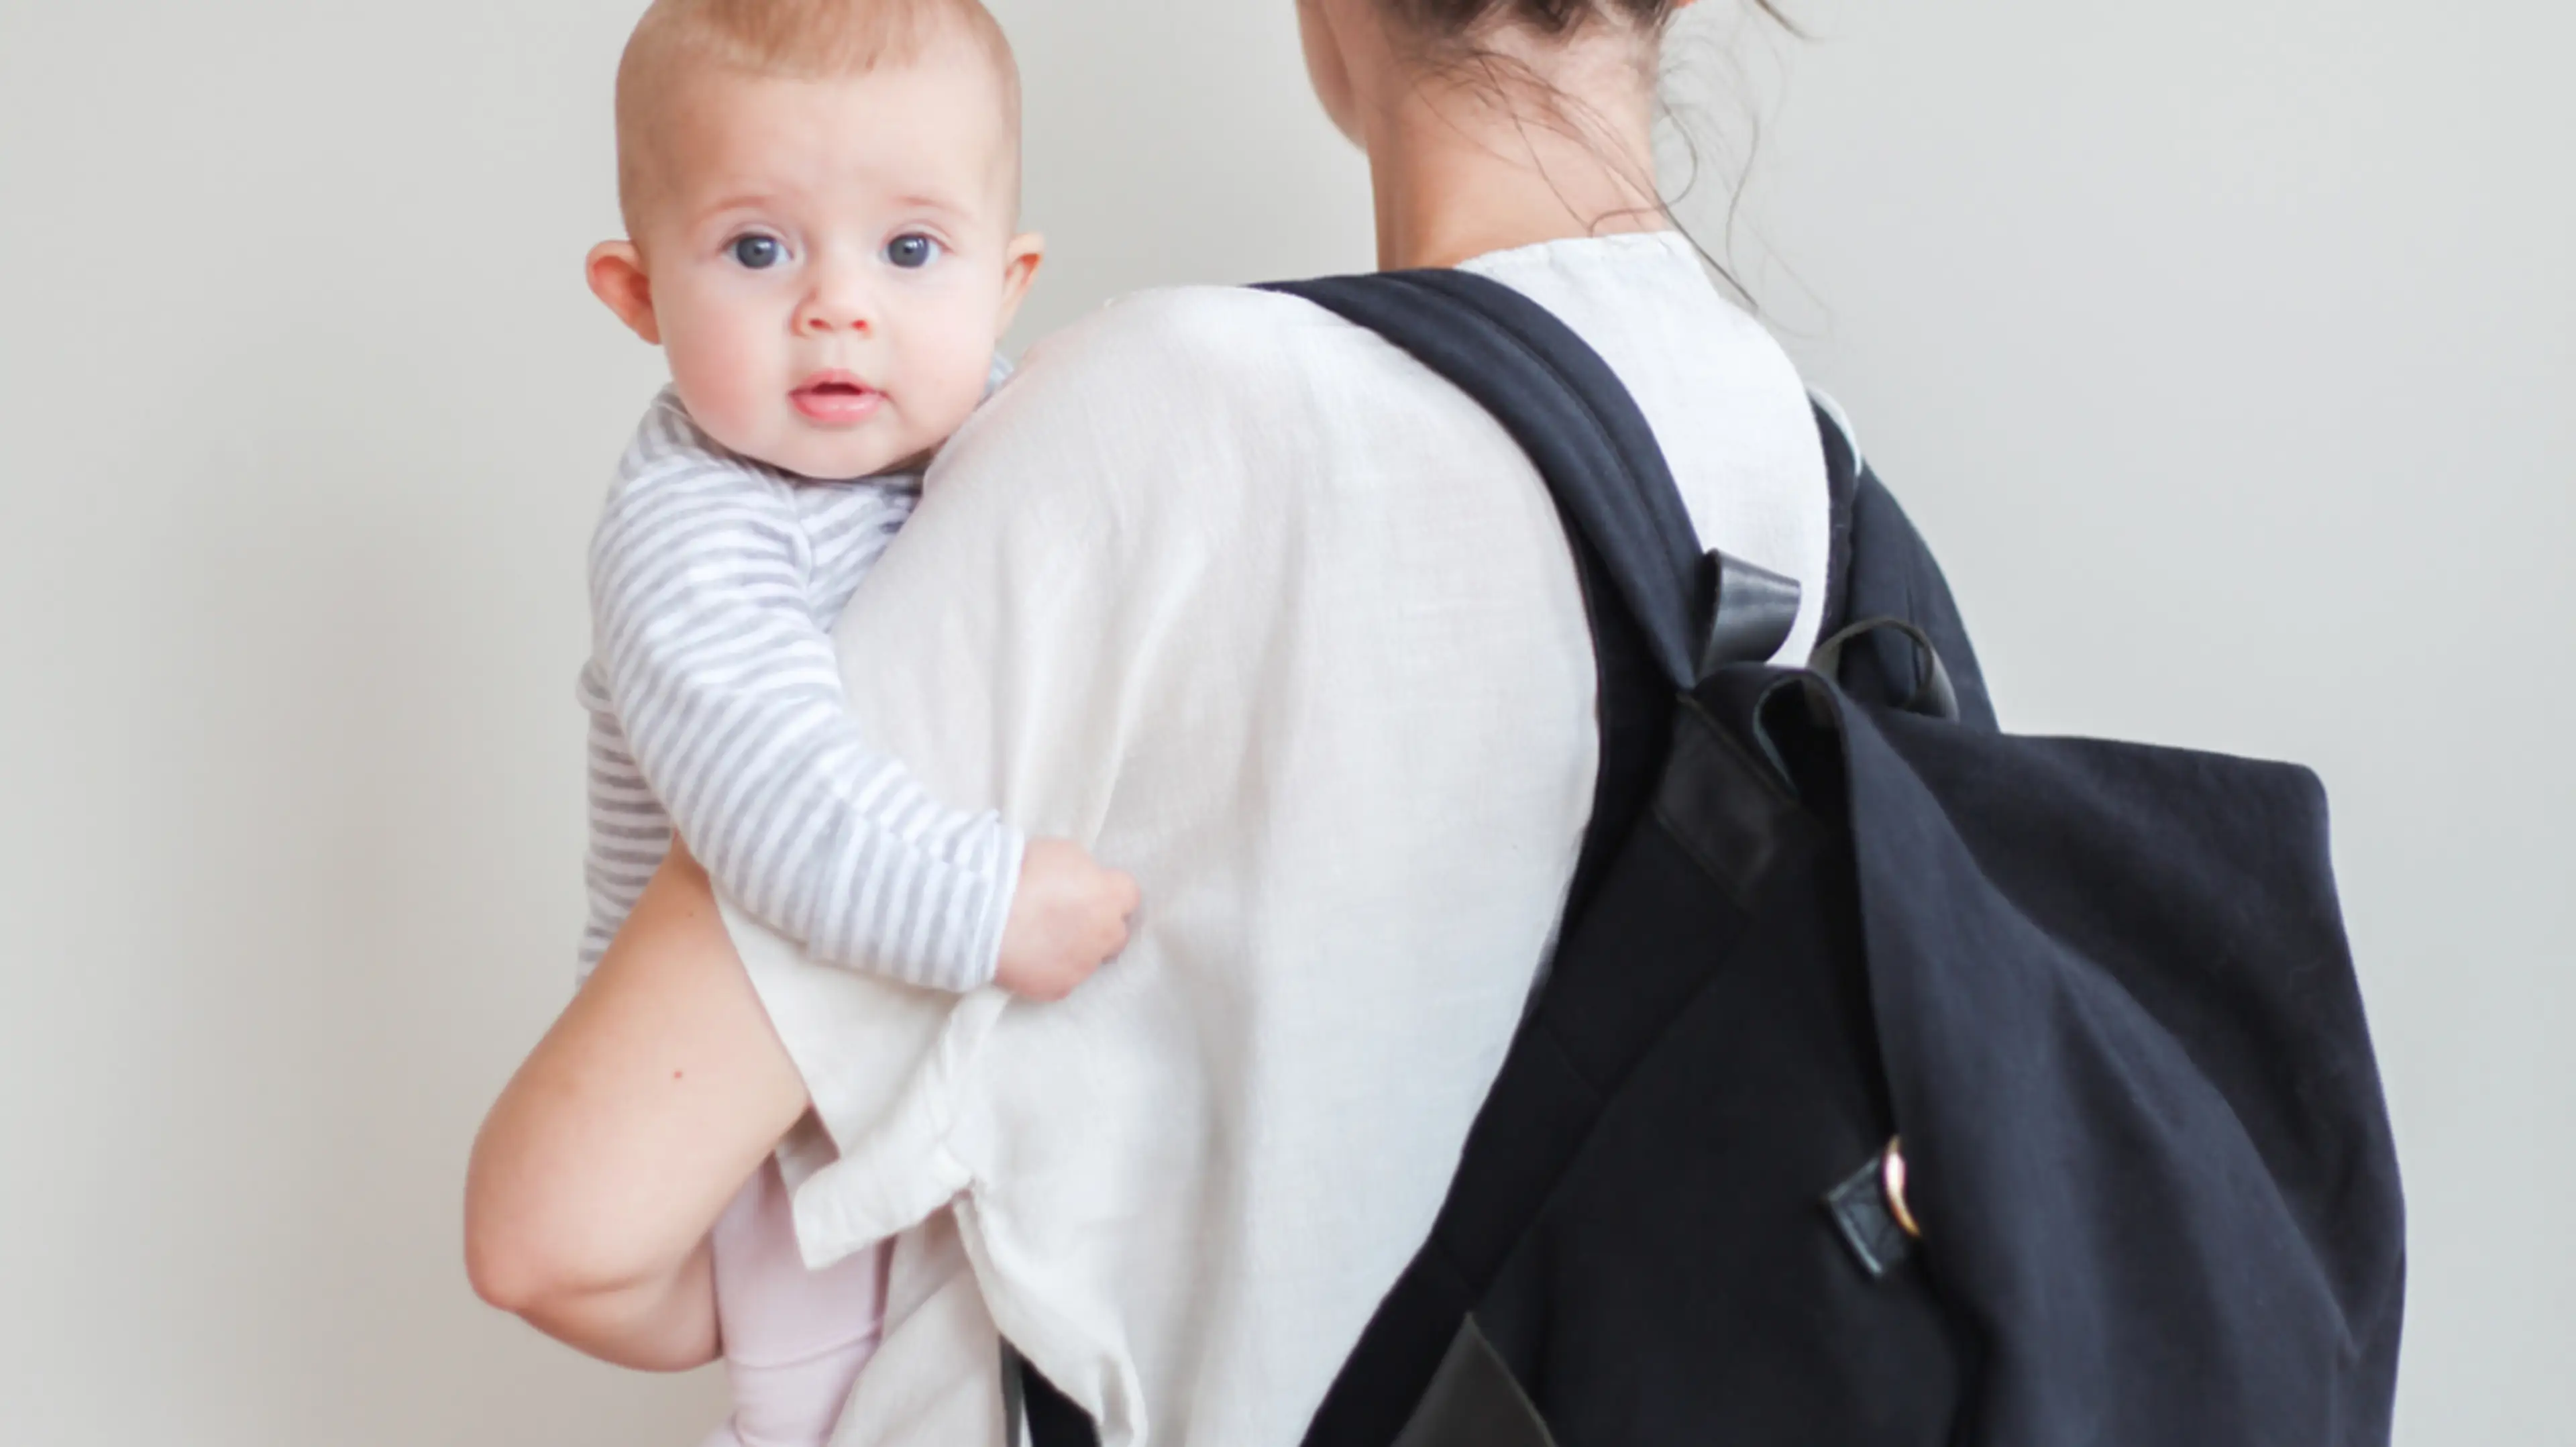 20 Diaper Bag Essentials You Need to Be Prepared For Anything